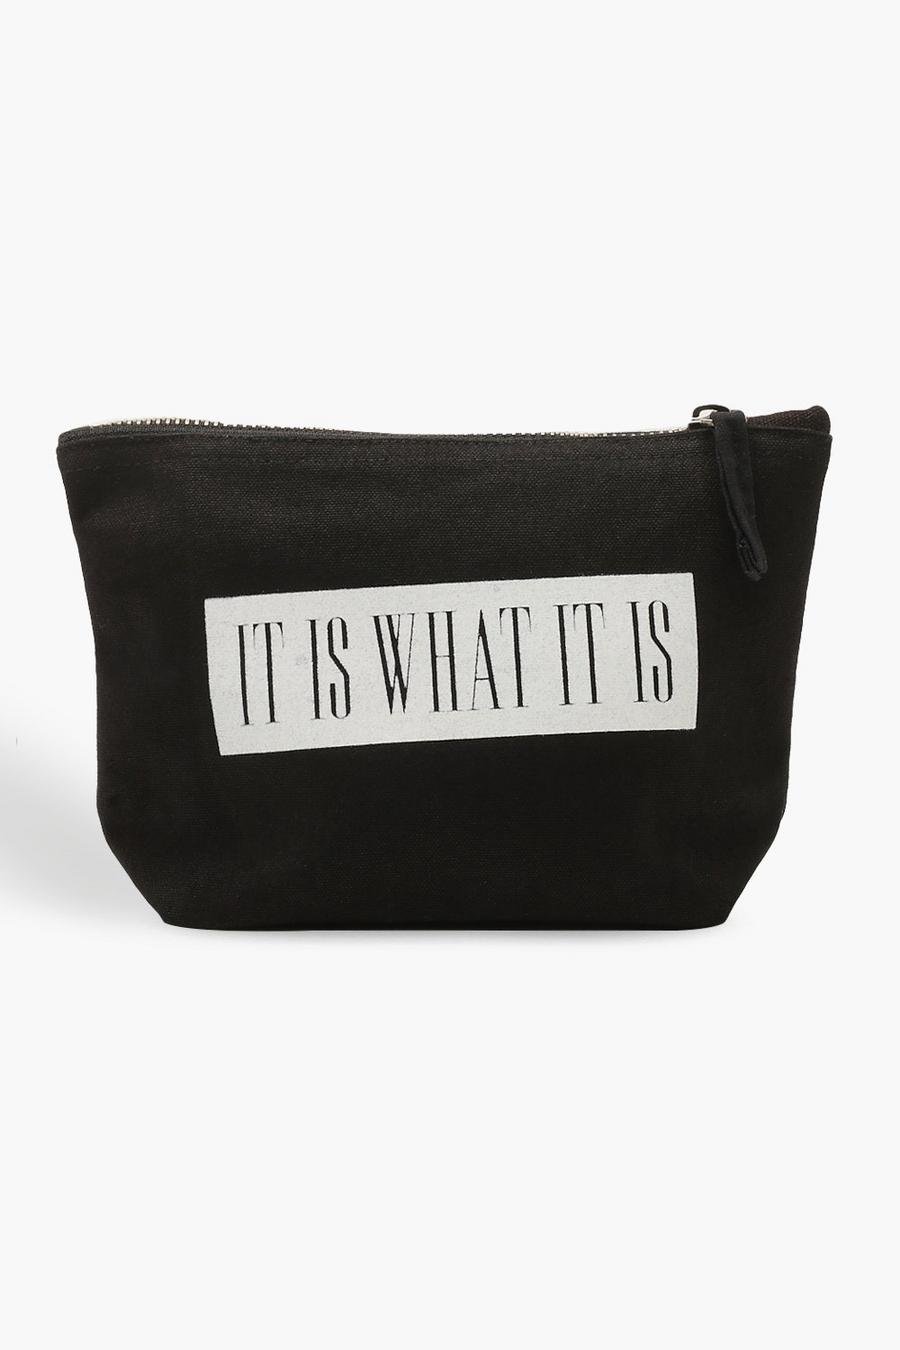 'It Is What It Is' Makeup Bag image number 1